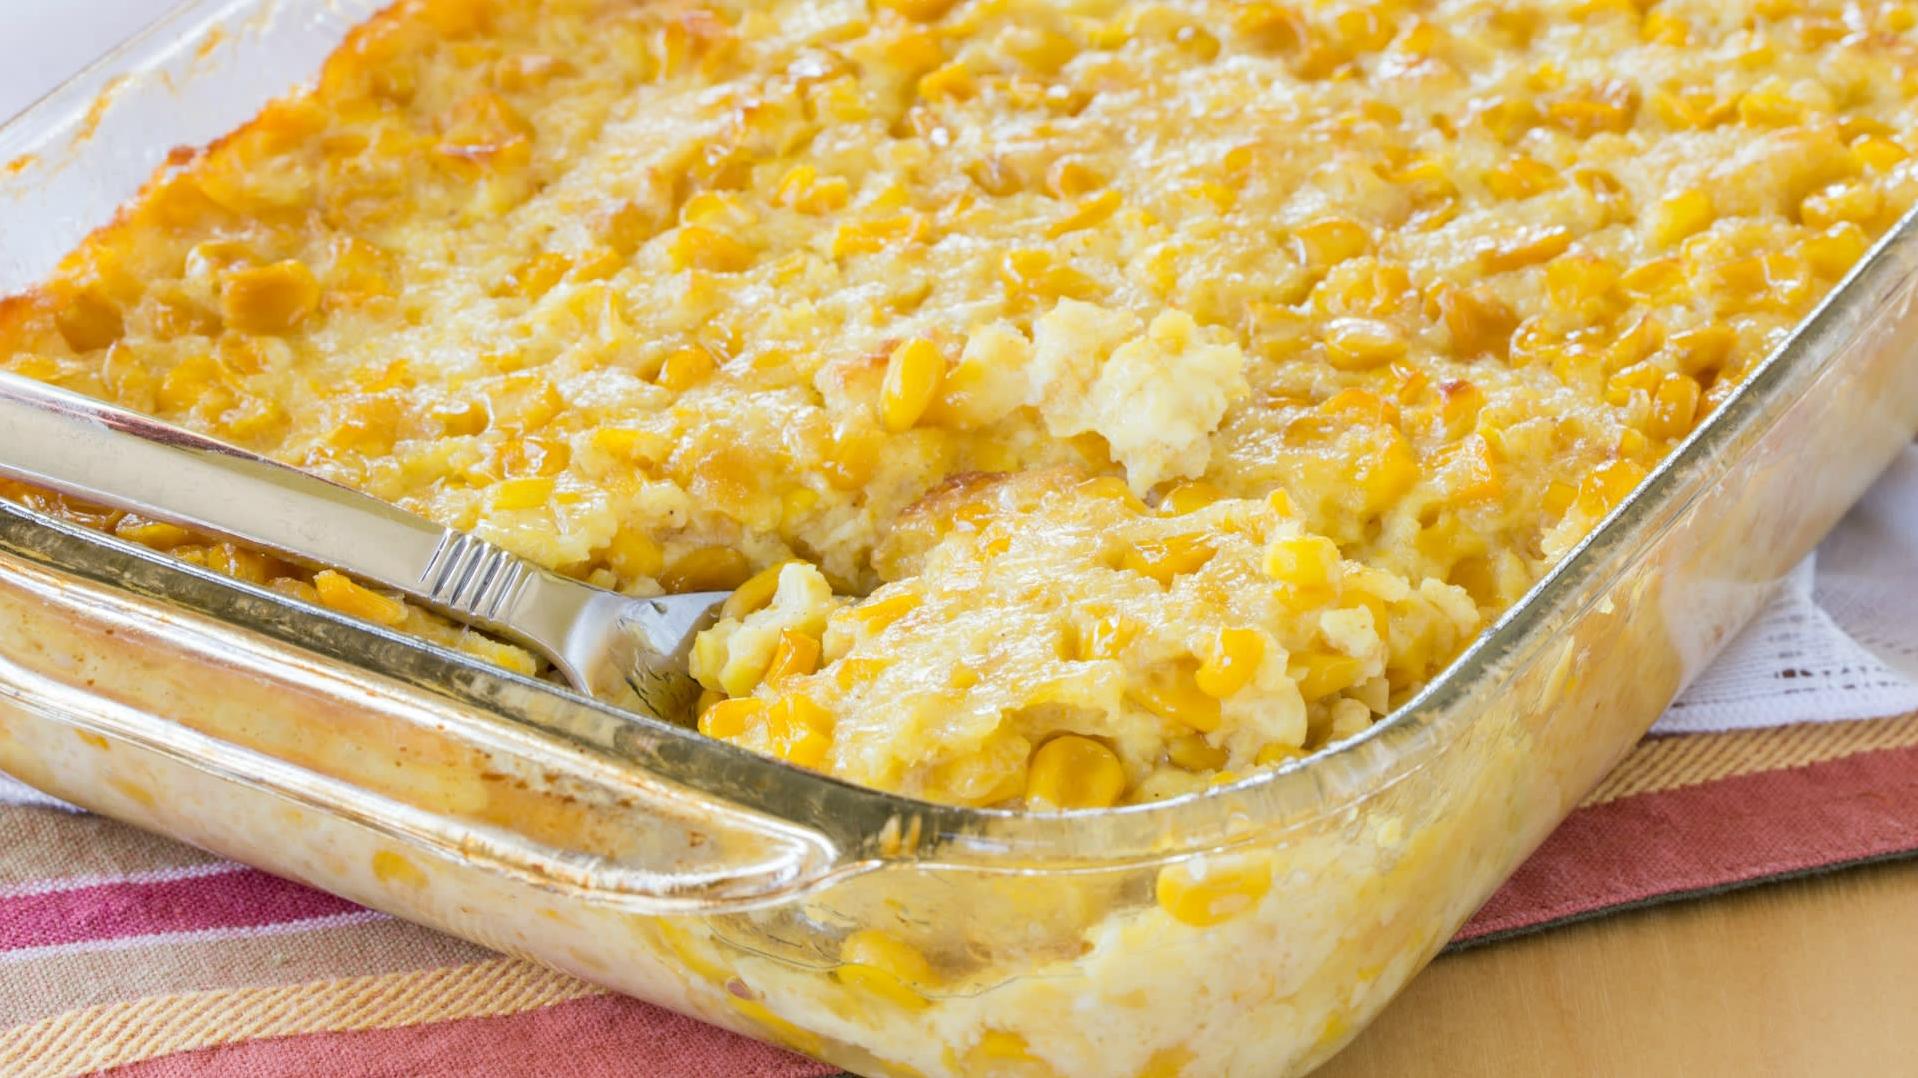  This Southern-inspired recipe is a must-try for corn lovers!